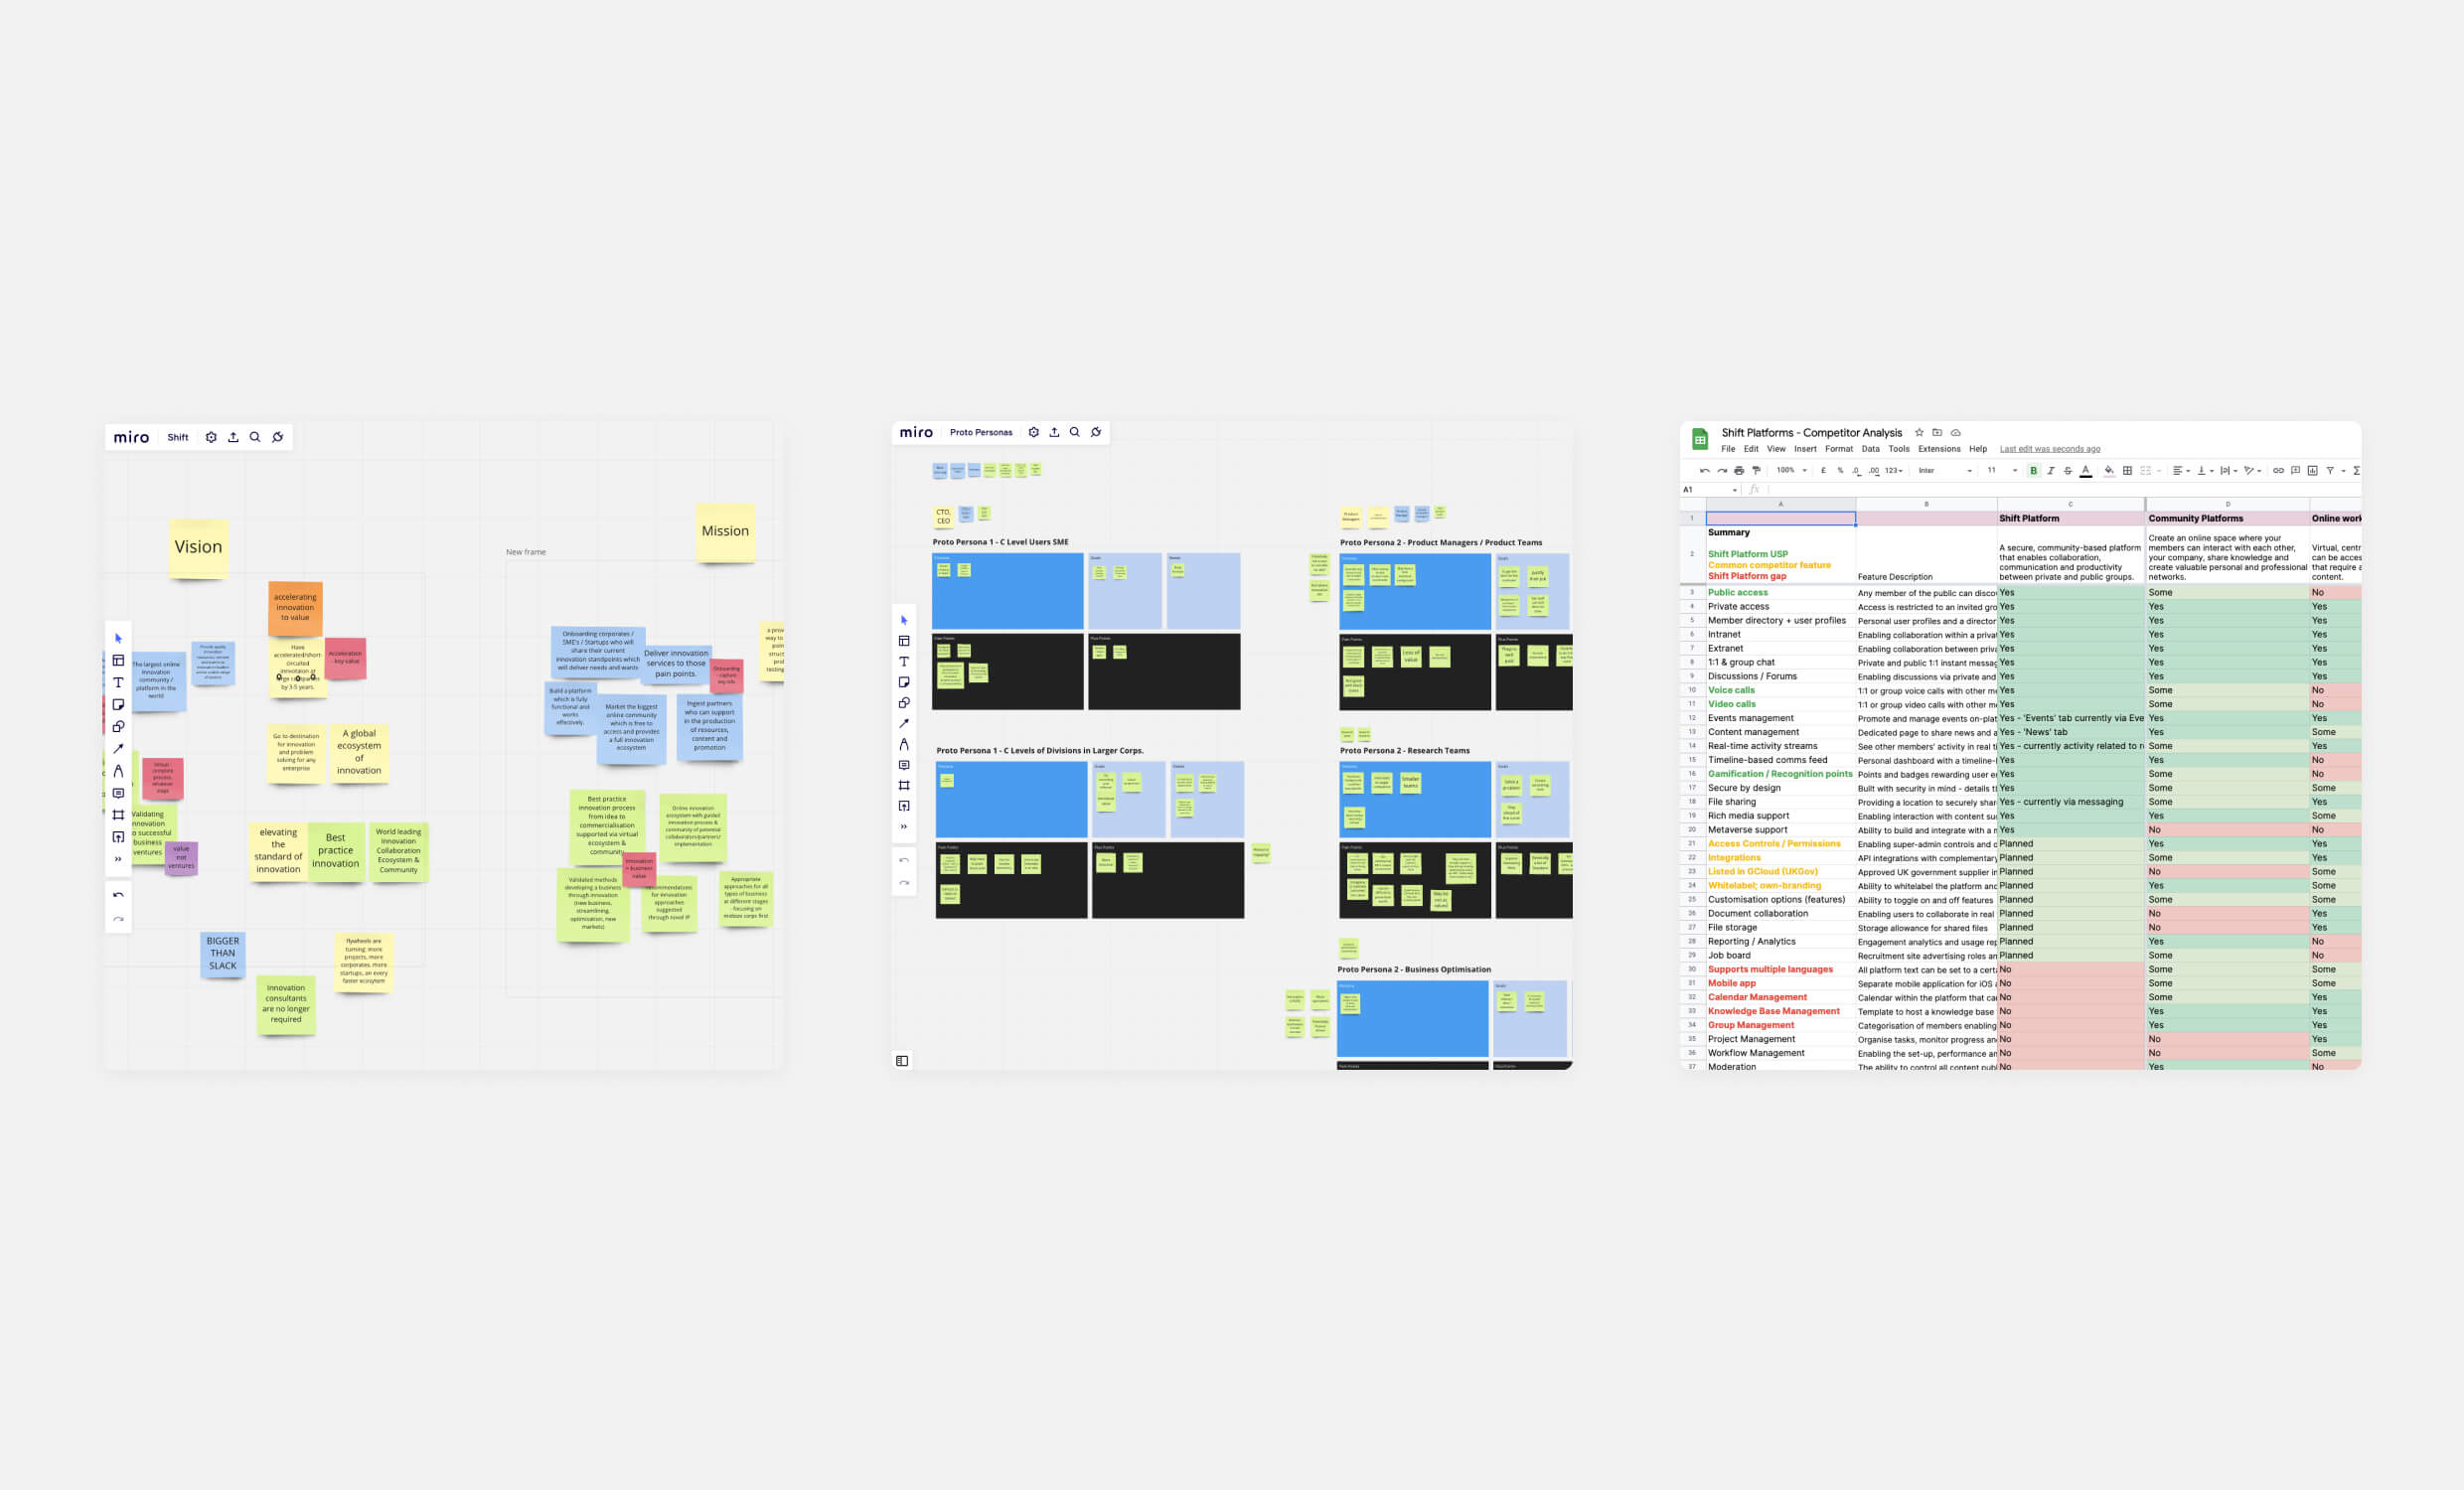 Three images showing Miro planning and research boards and a screenshot of the Shit competitor analysis